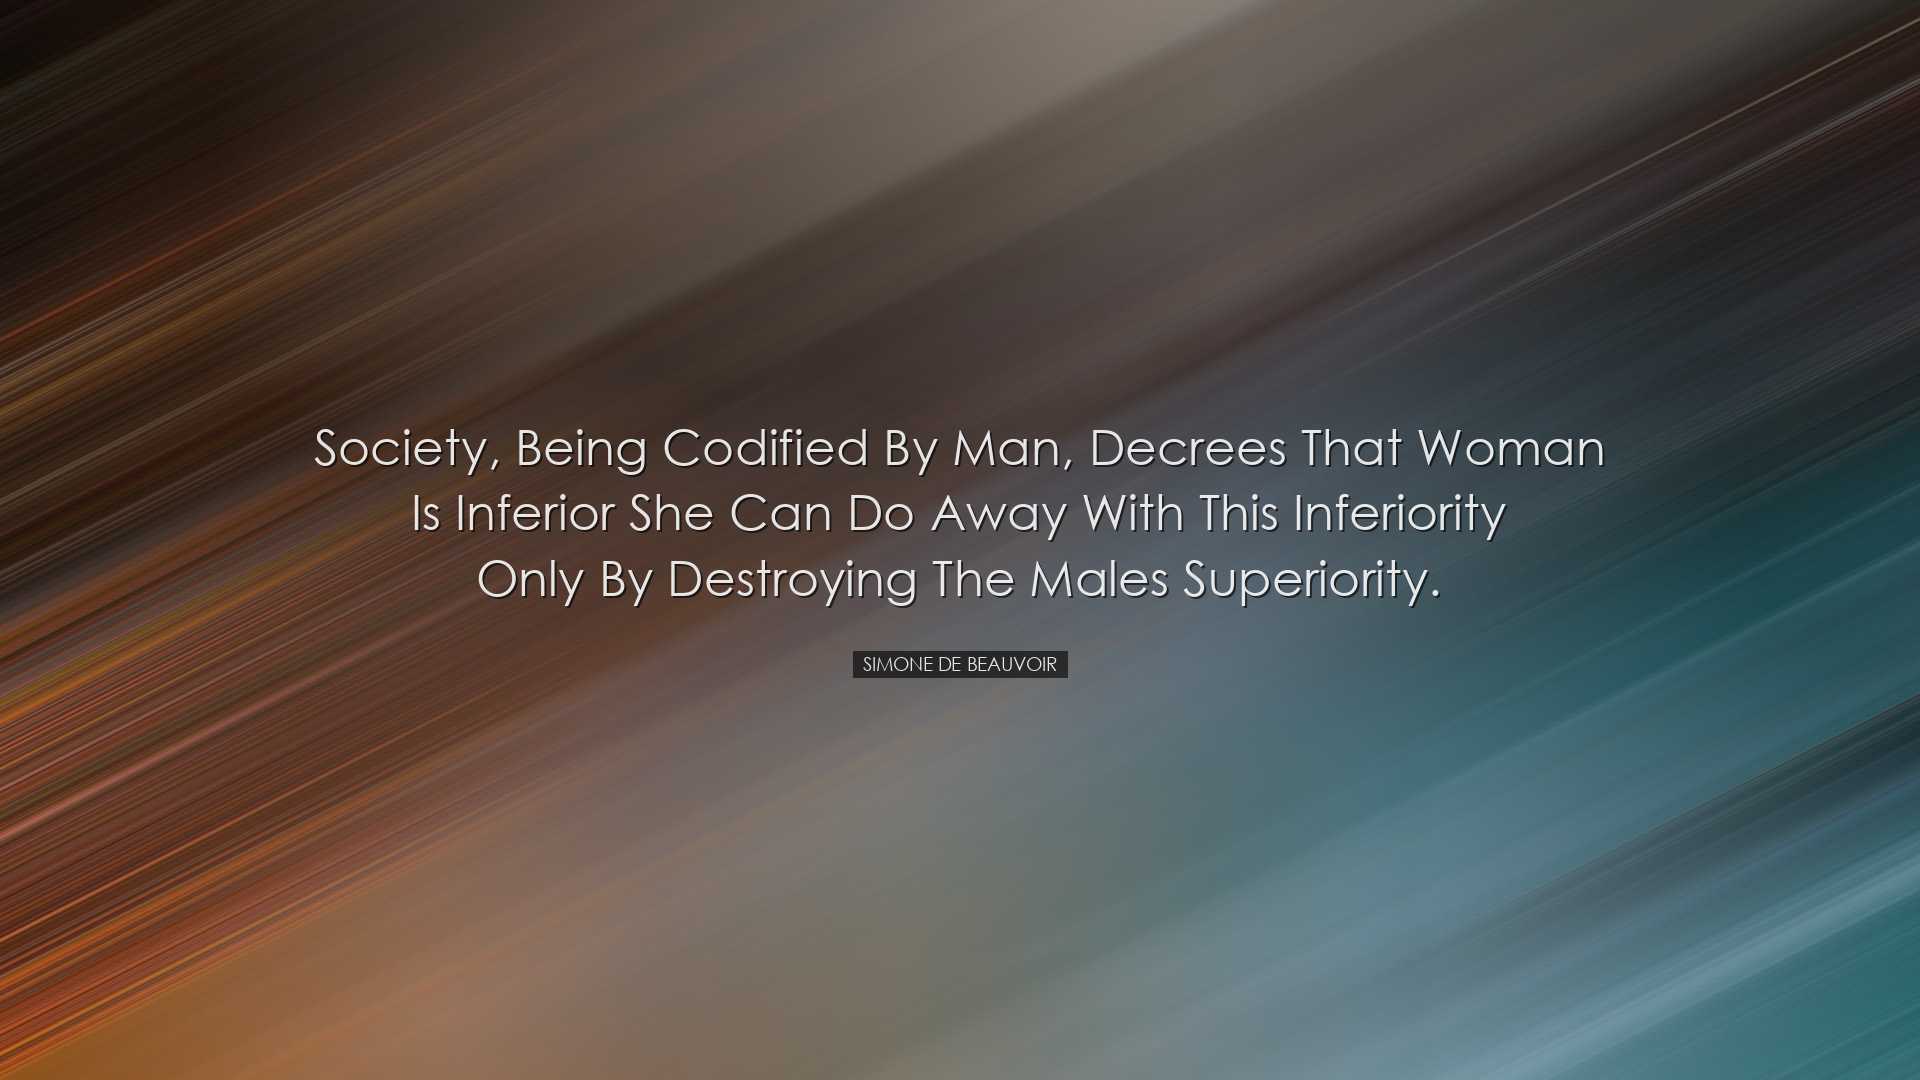 Society, being codified by man, decrees that woman is inferior she